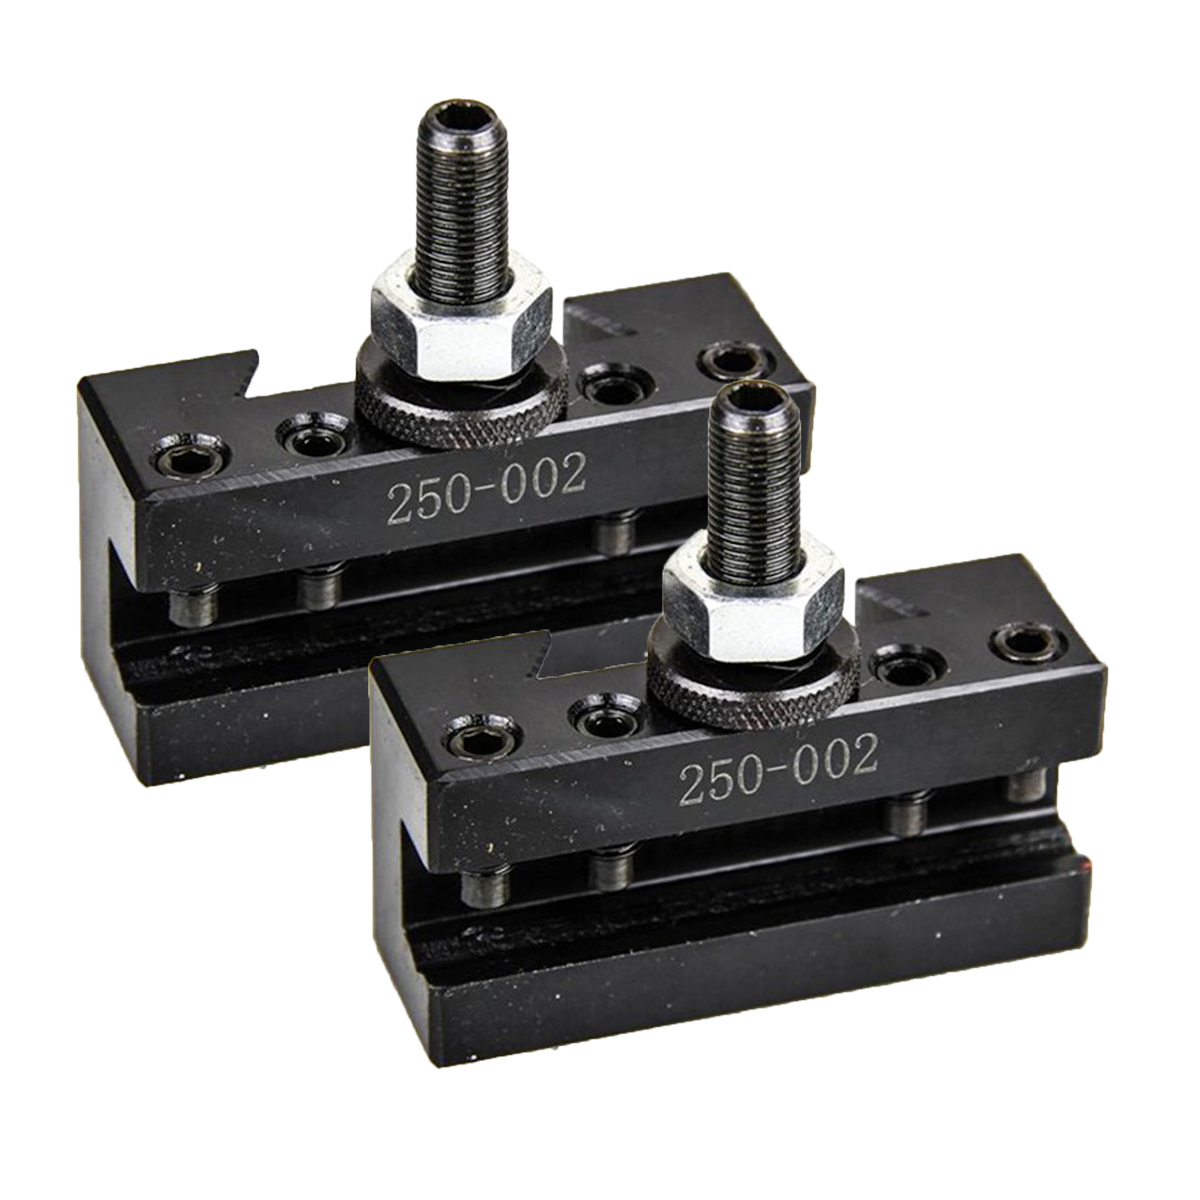 2-Piece-Set-Of-Machifit-250-000-Wedge-Main-Body-Tool-Holder-Exclusively-For-250-100250-111-Tool-Hold-1824364-4